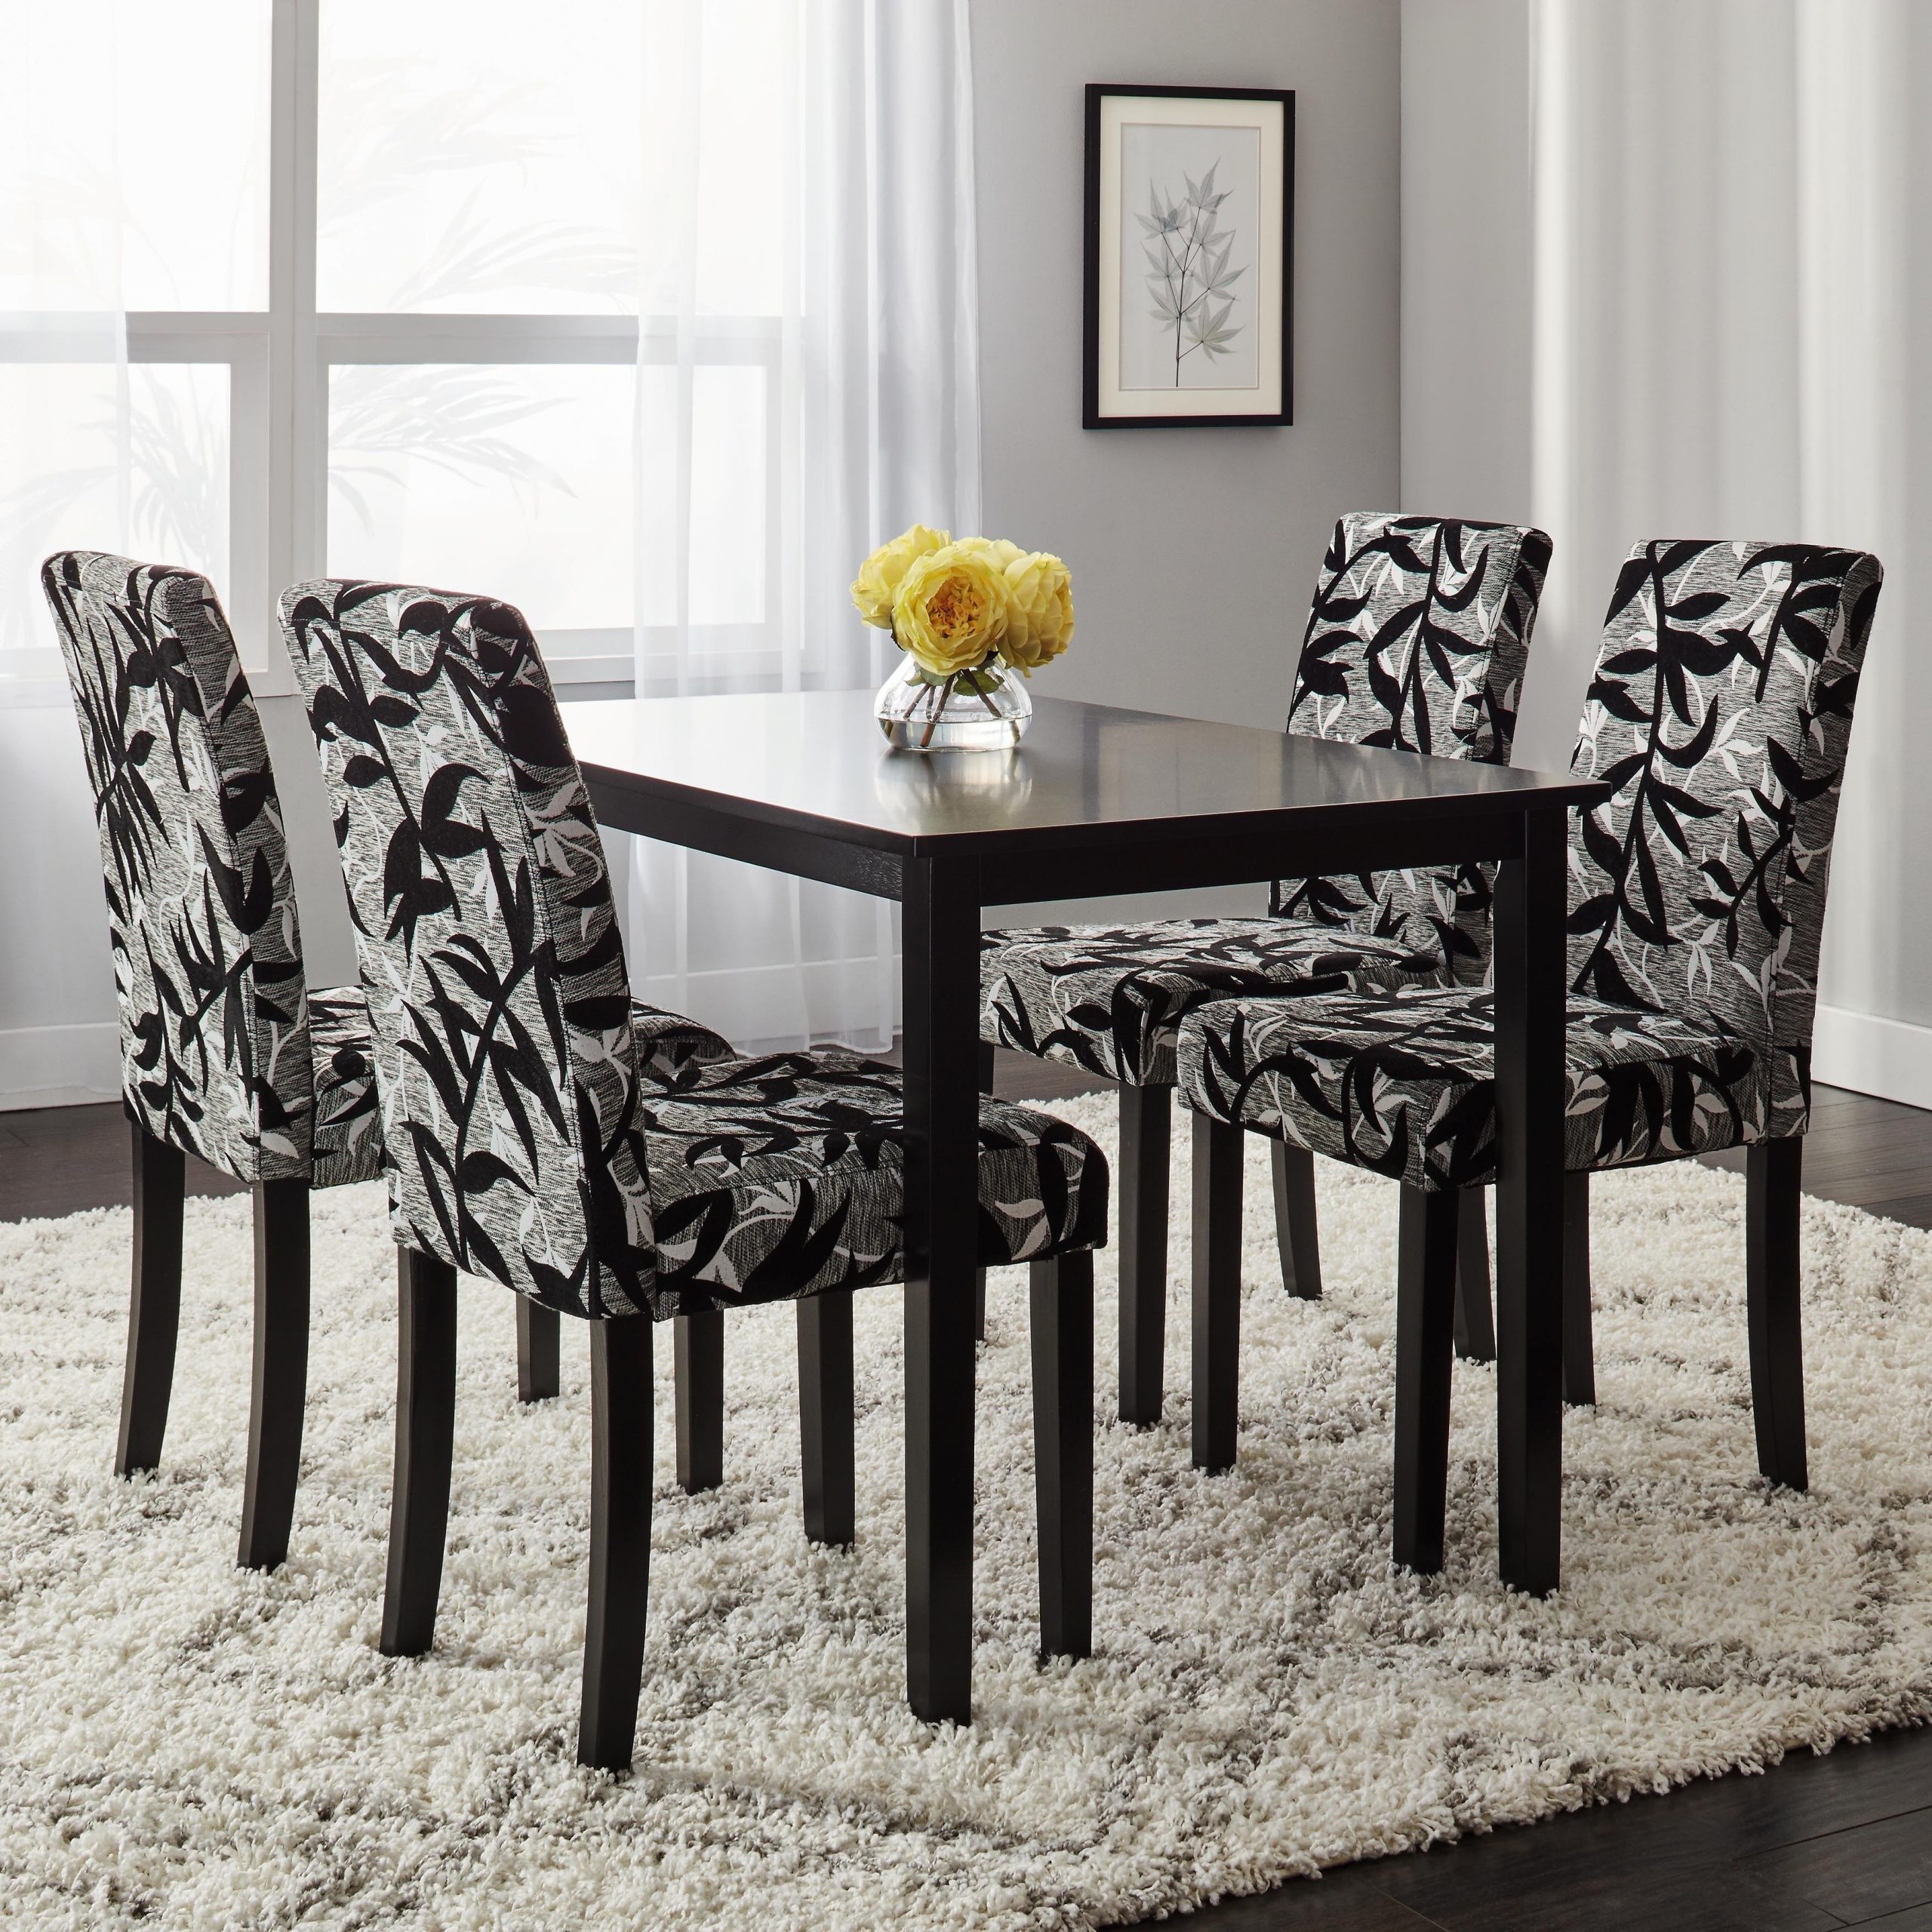 Chair Wondrous Kitchen Table And Chair Sets With with regard to size 3500 X 3500